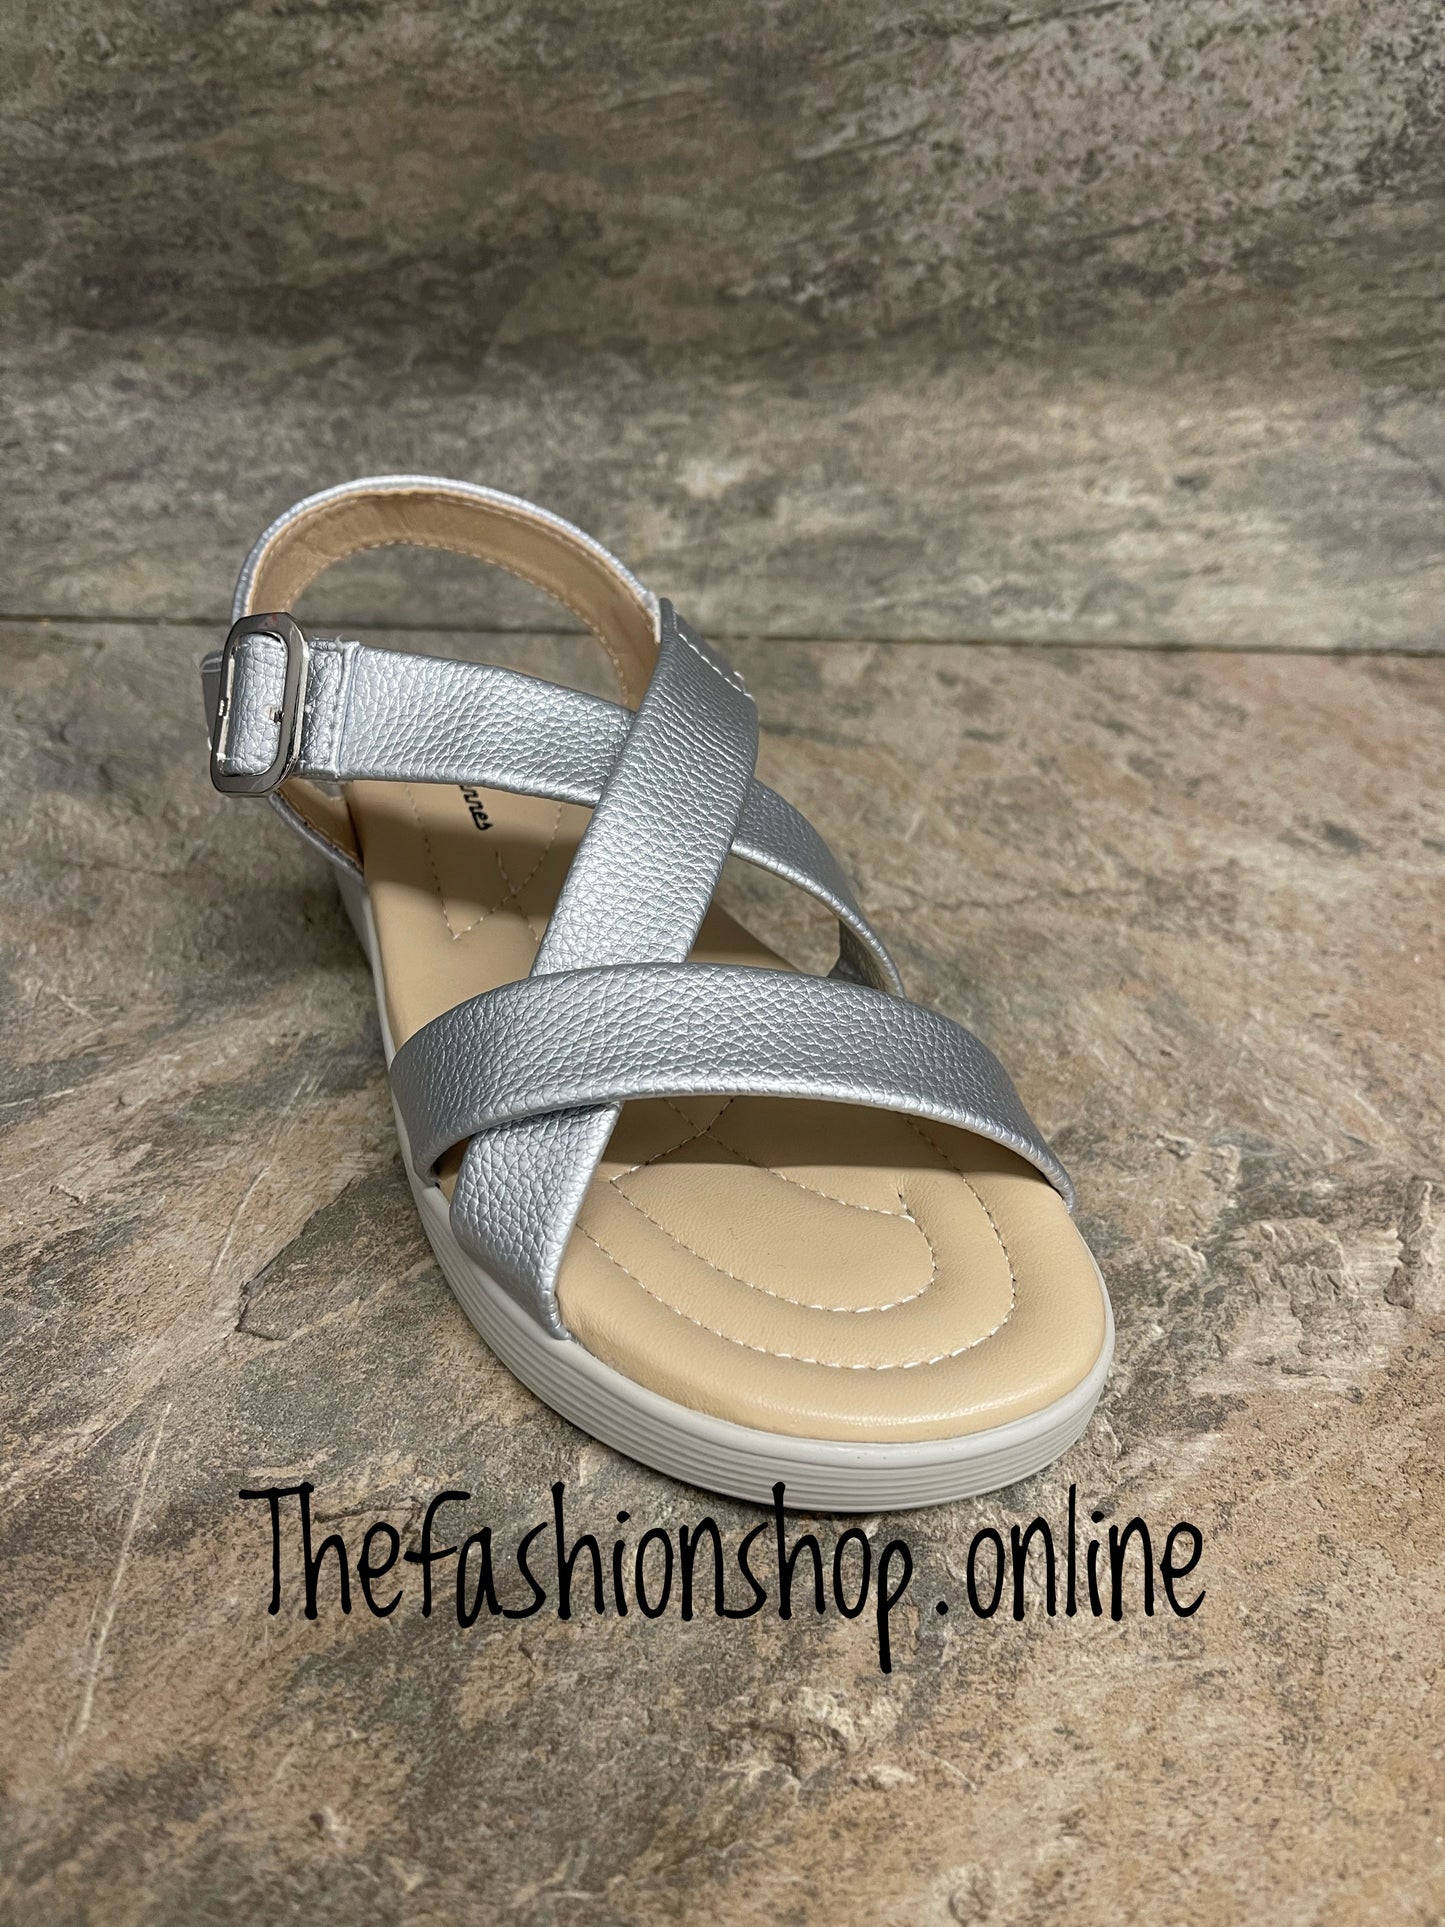 Silver low wedge strappy sandals sizes 3.5-7